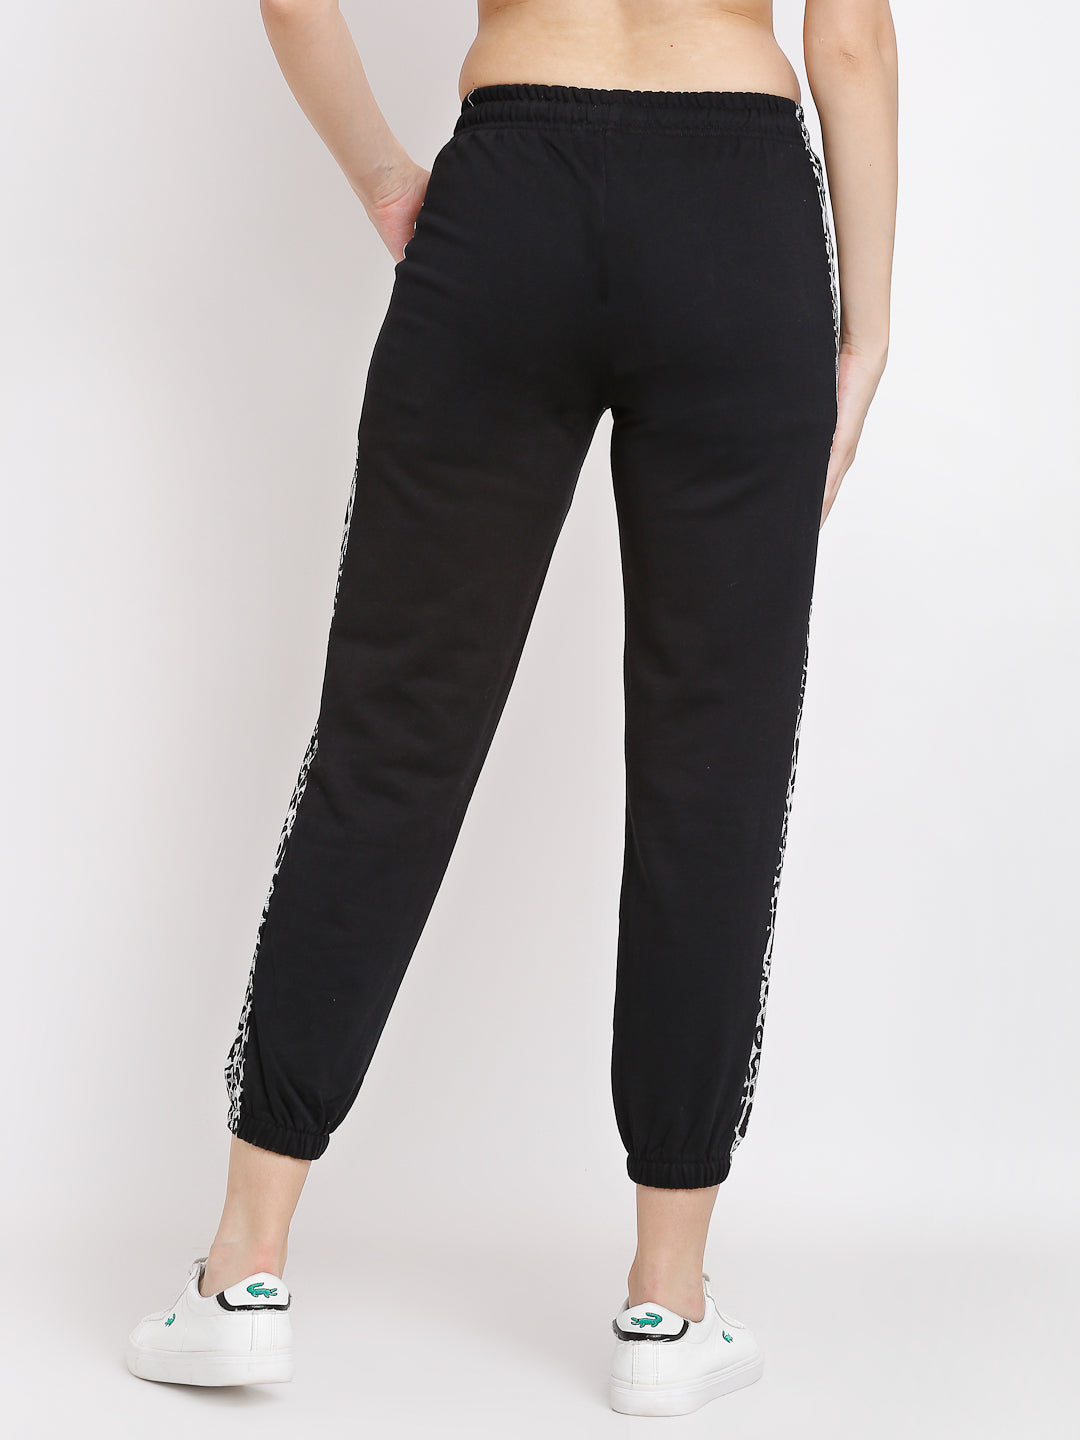 loose joggers for women